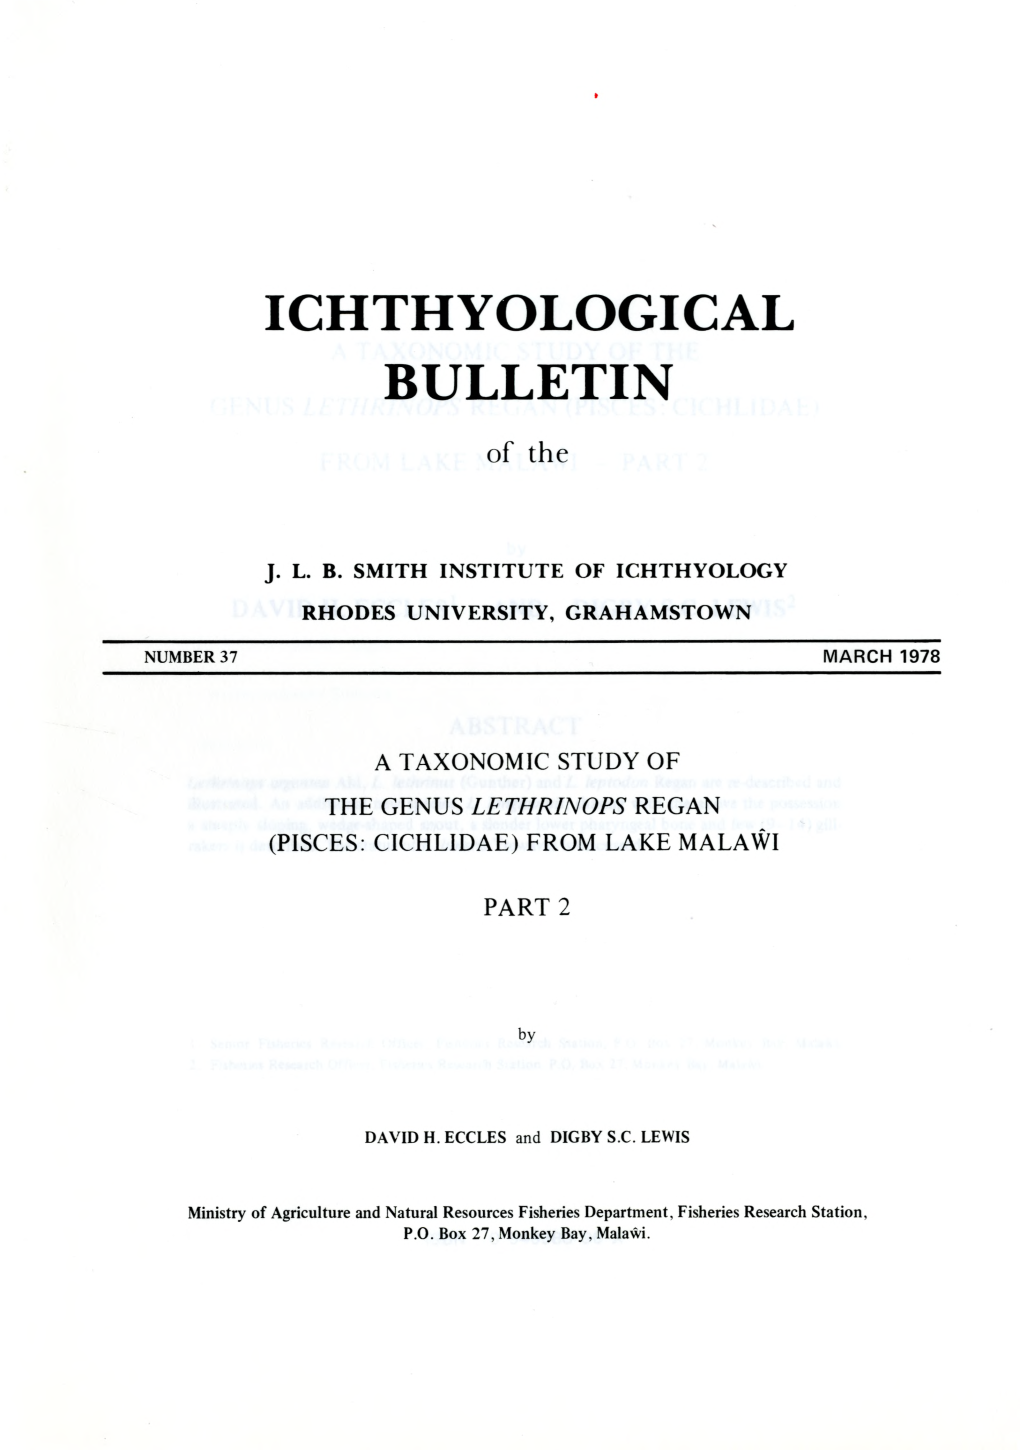 ICHTHYOLOGICAL BULLETIN of The